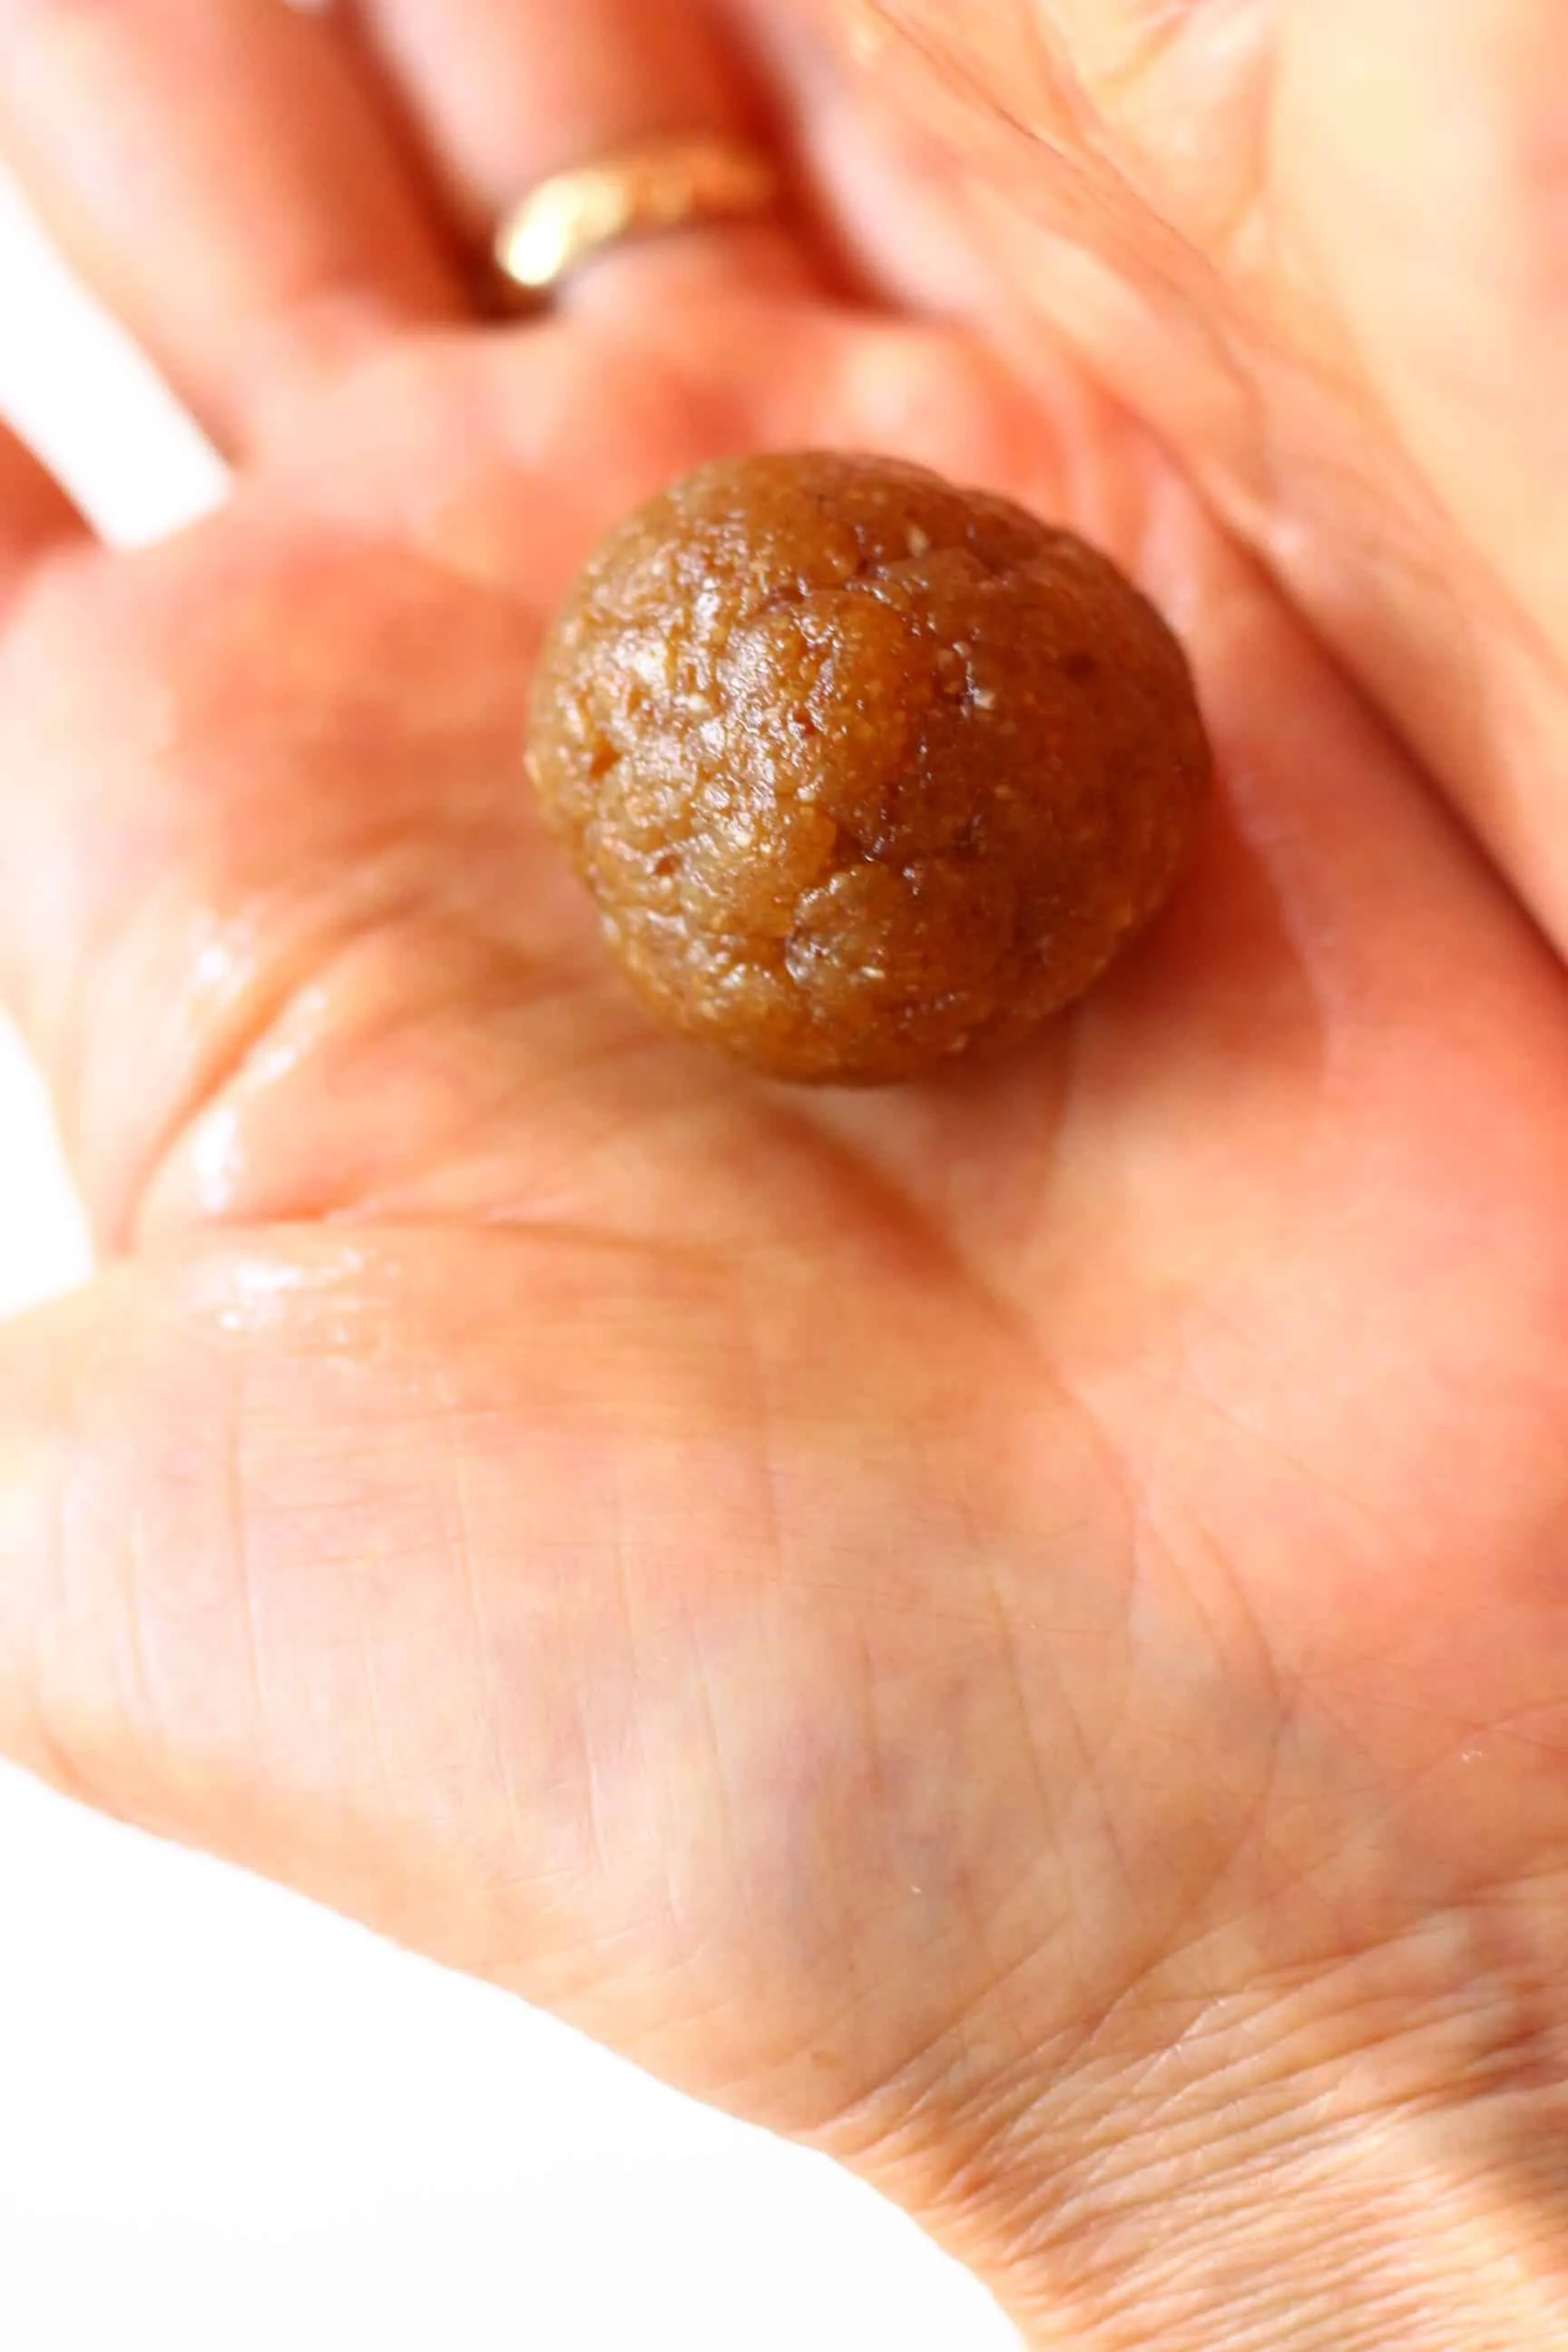 A round brown vegan energy ball being rolled between two hands